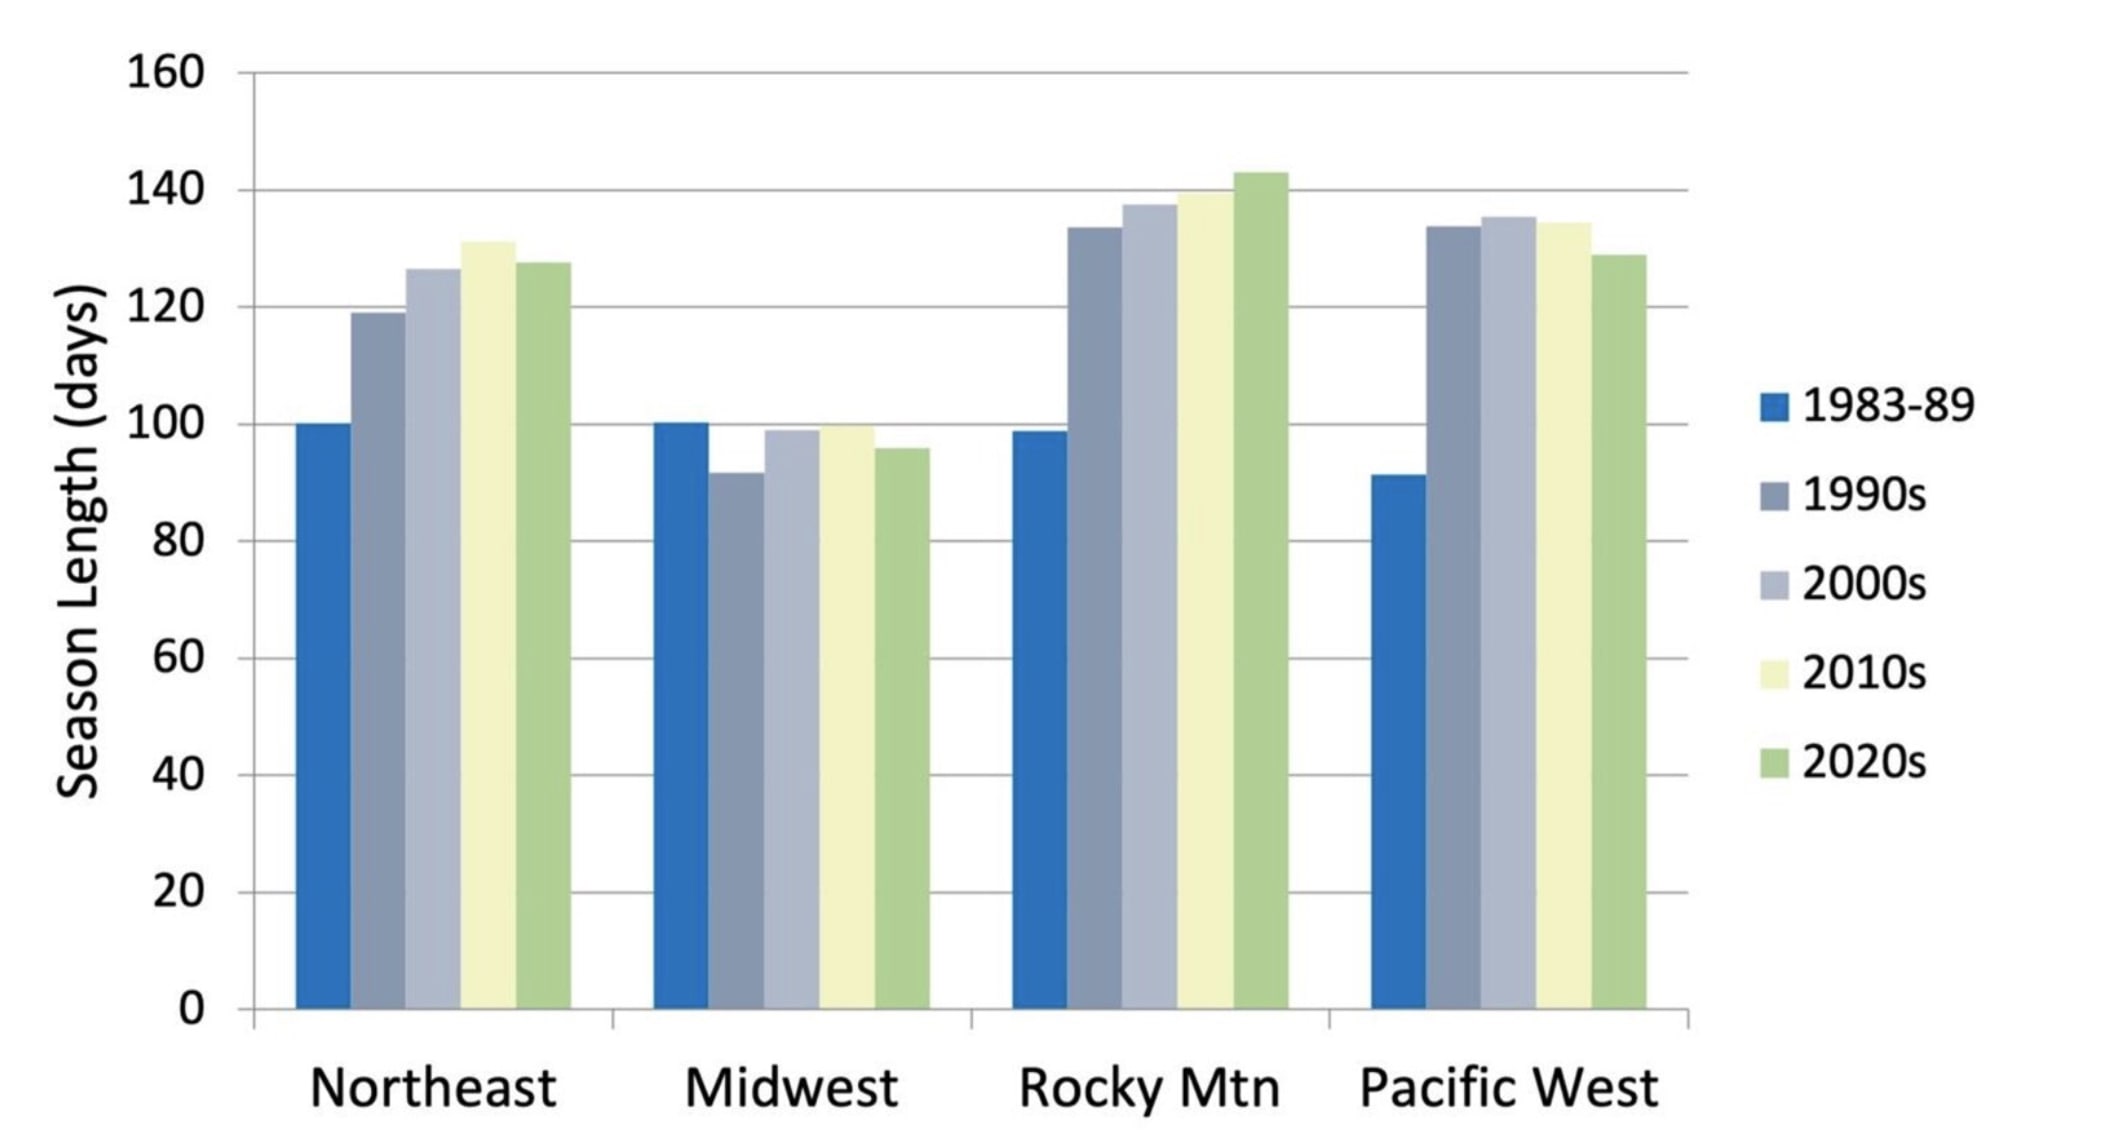 Average ski season length across the U.S. spread out by region and decade